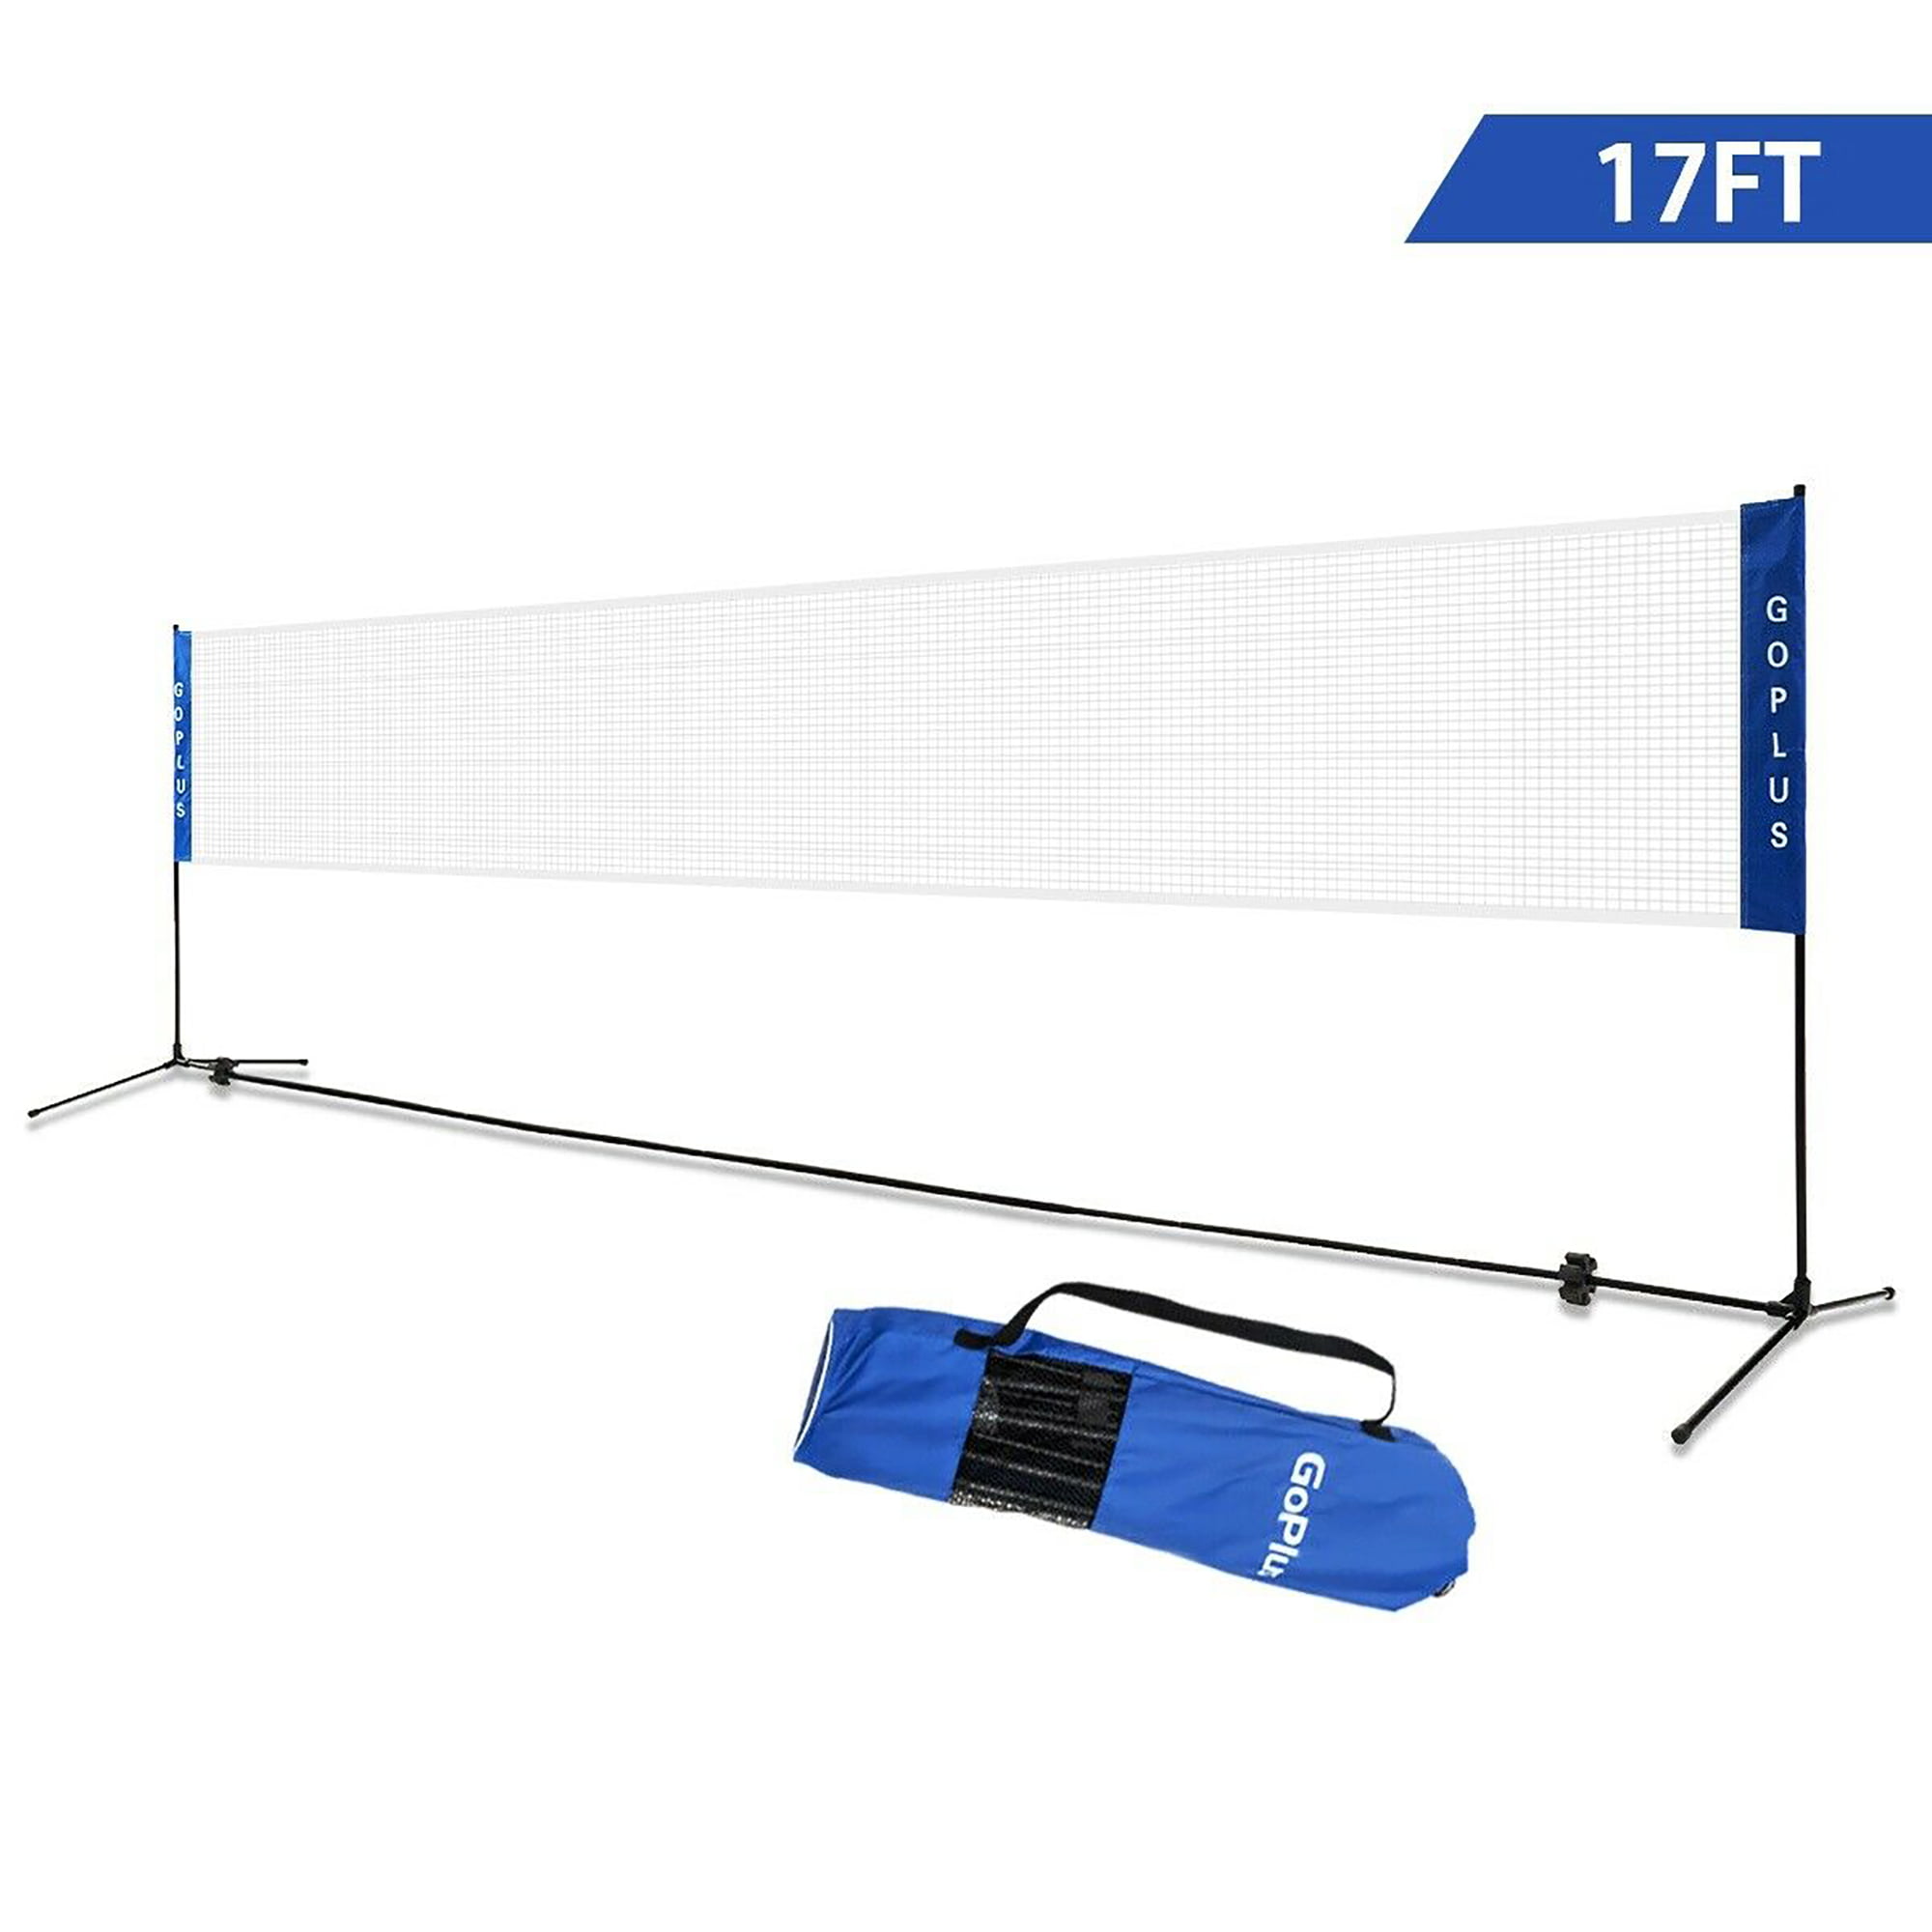 20 Feet Portable Badminton Volleyball Tennis Net Set with Stand/Frame Carry Bag 